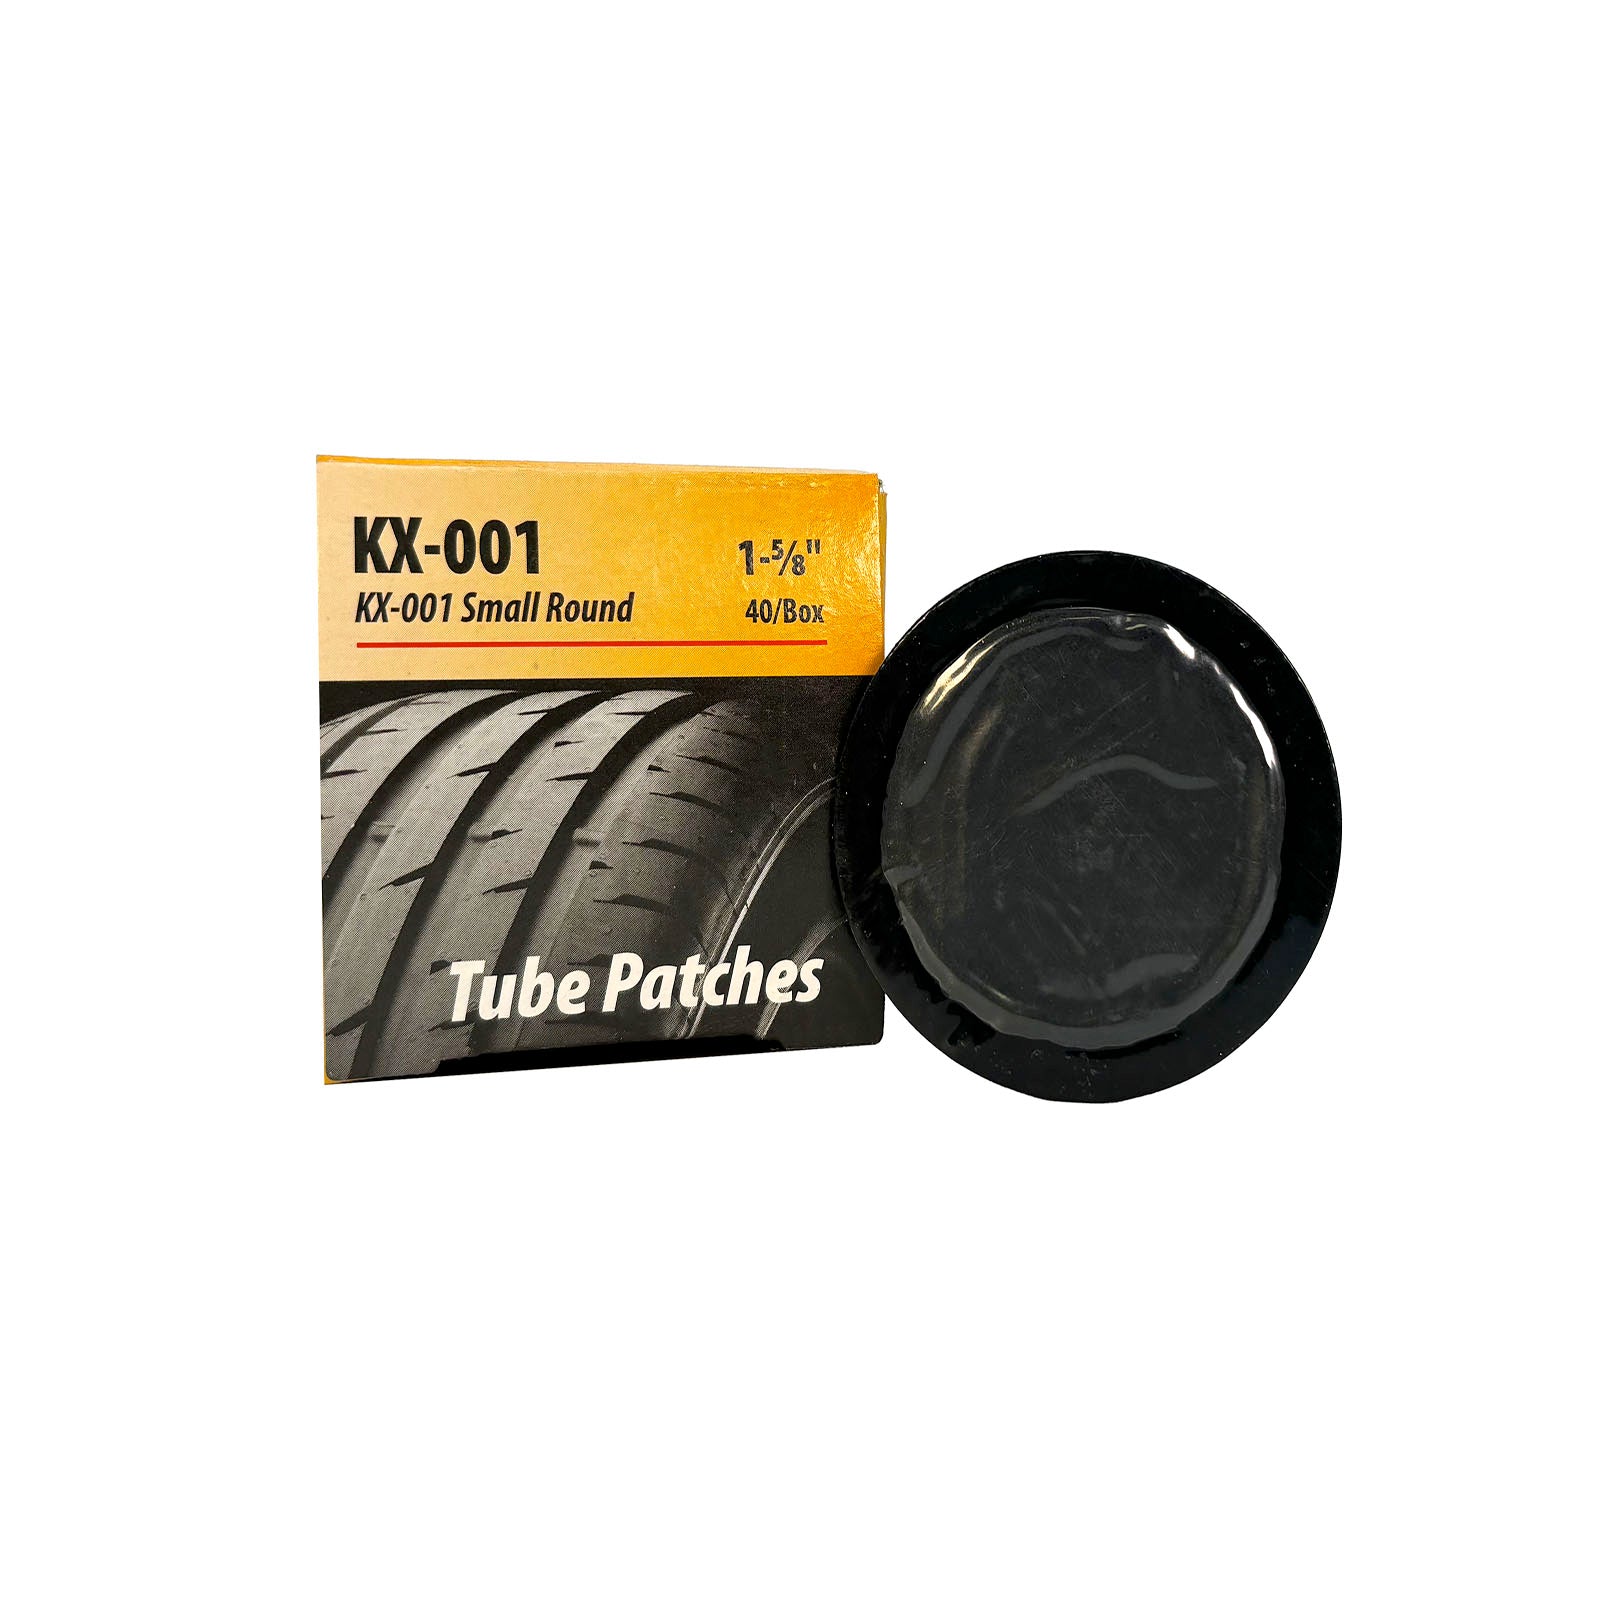 Kex 001 Tube Patch, 1-5/8" Round (40 bx)